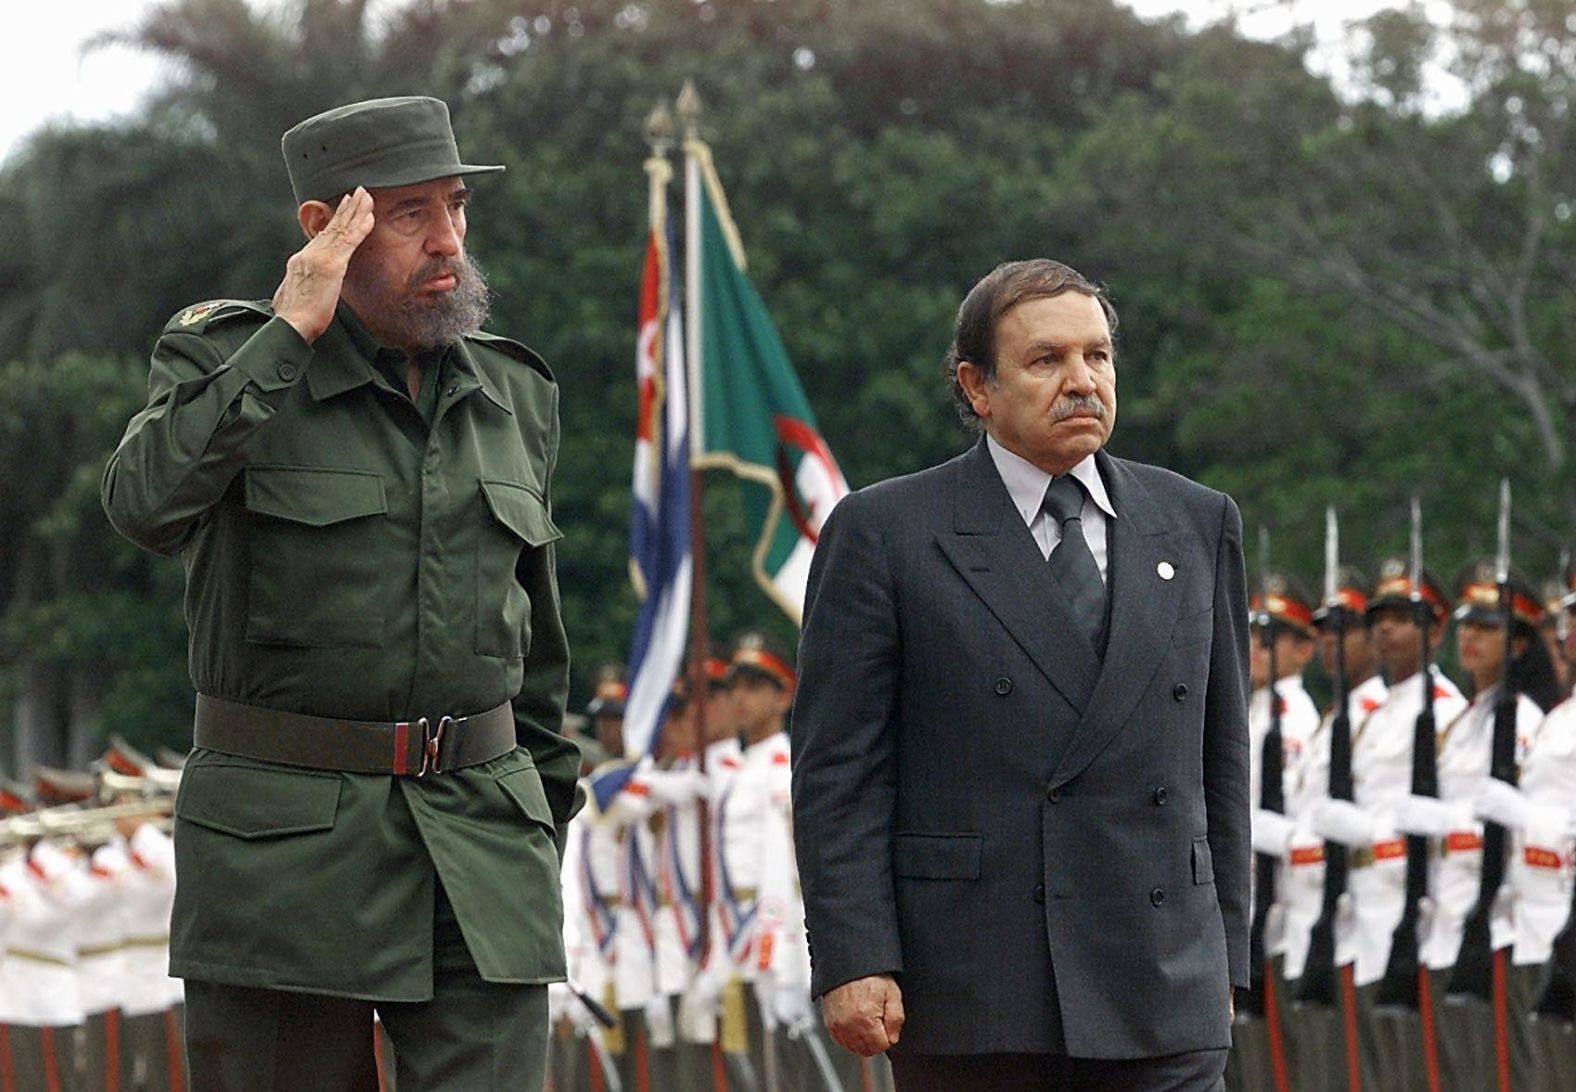 Cuban President Fidel Castro salutes troops alongside Bouteflika, who was making an official visit to Cuba in April 2000.